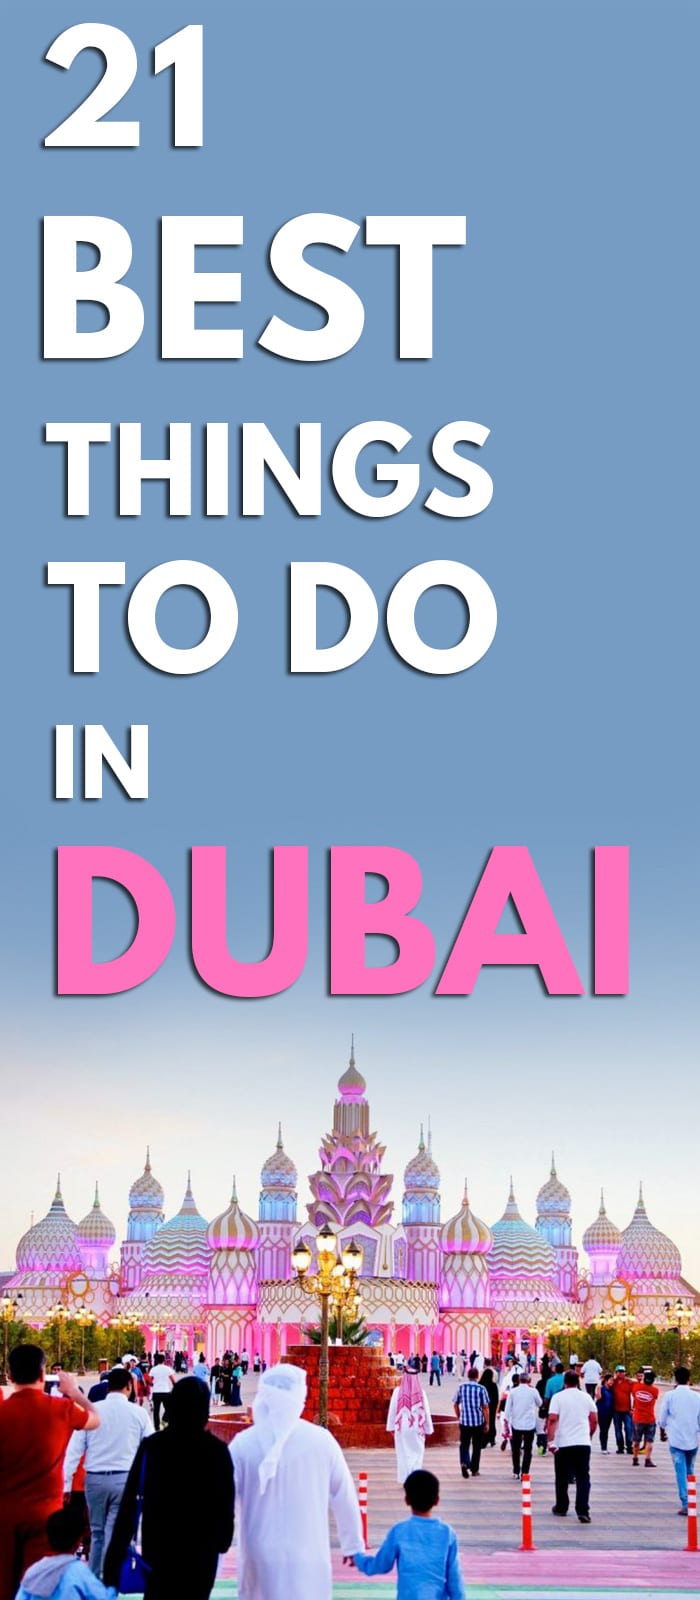 21 Best Things to do in Dubai - Best Dubai tour Packages